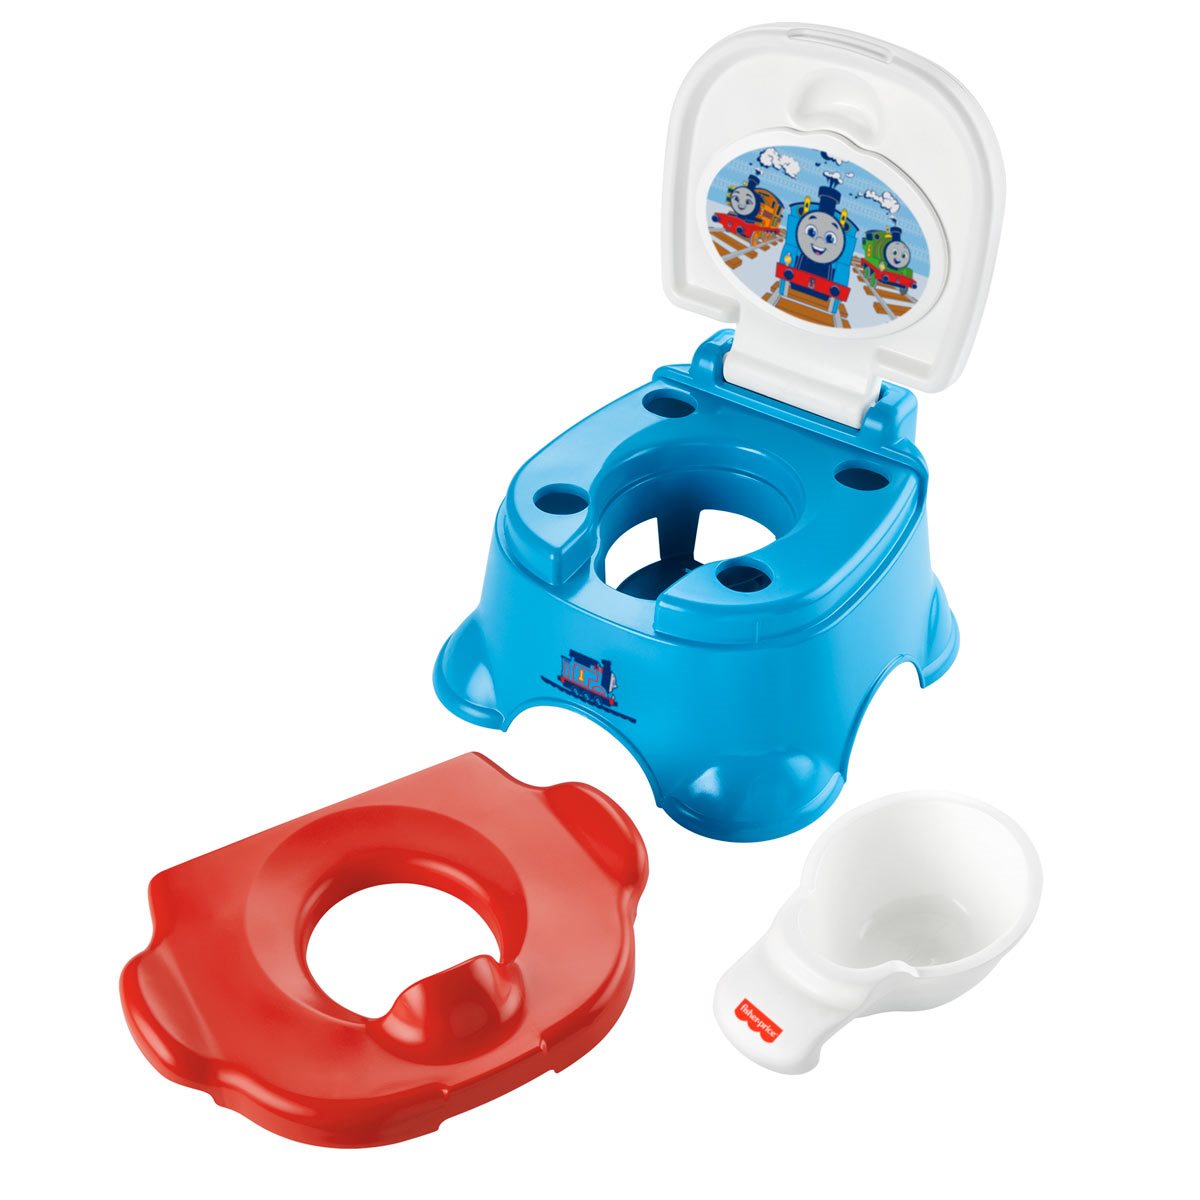 Fisher Price 2-in-1 Travel Potty